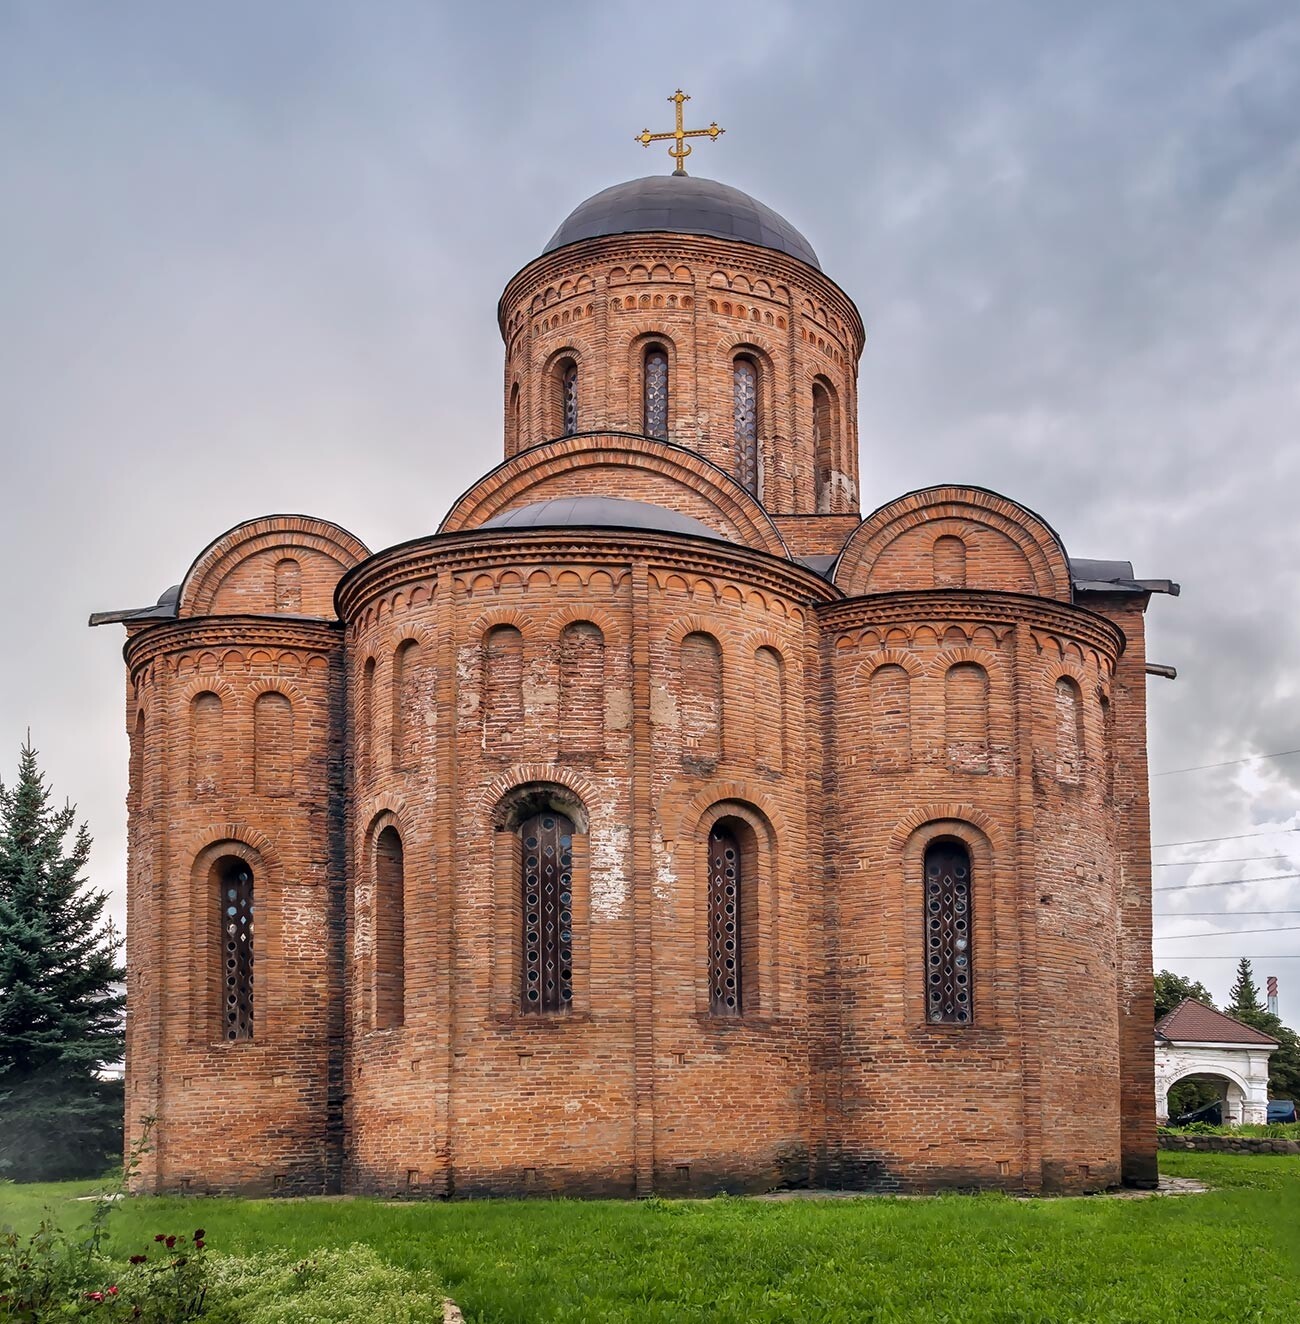 The Peter and Paul Church, Smolensk, 1146. One of the few Russian churches dating back to the times before the Mongol-Tatar invasion.